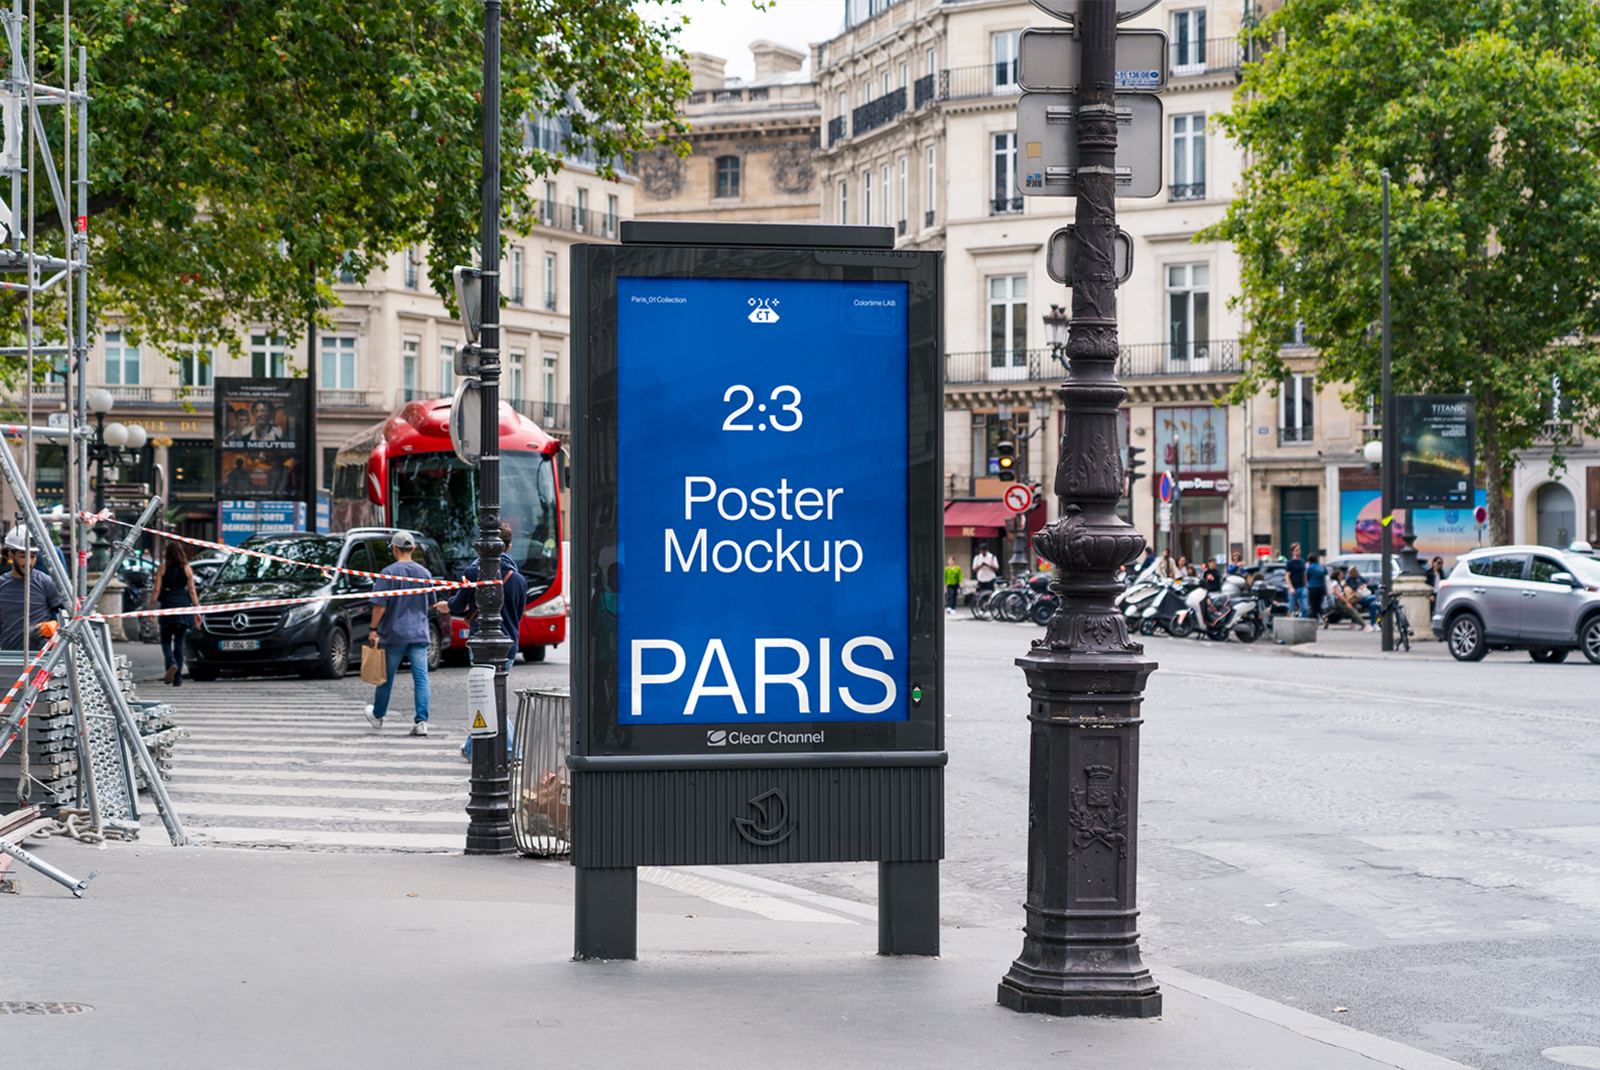 Urban poster mockup on a city street for display advertising presentation, surrounded by everyday street scenery with pedestrians and vehicles.